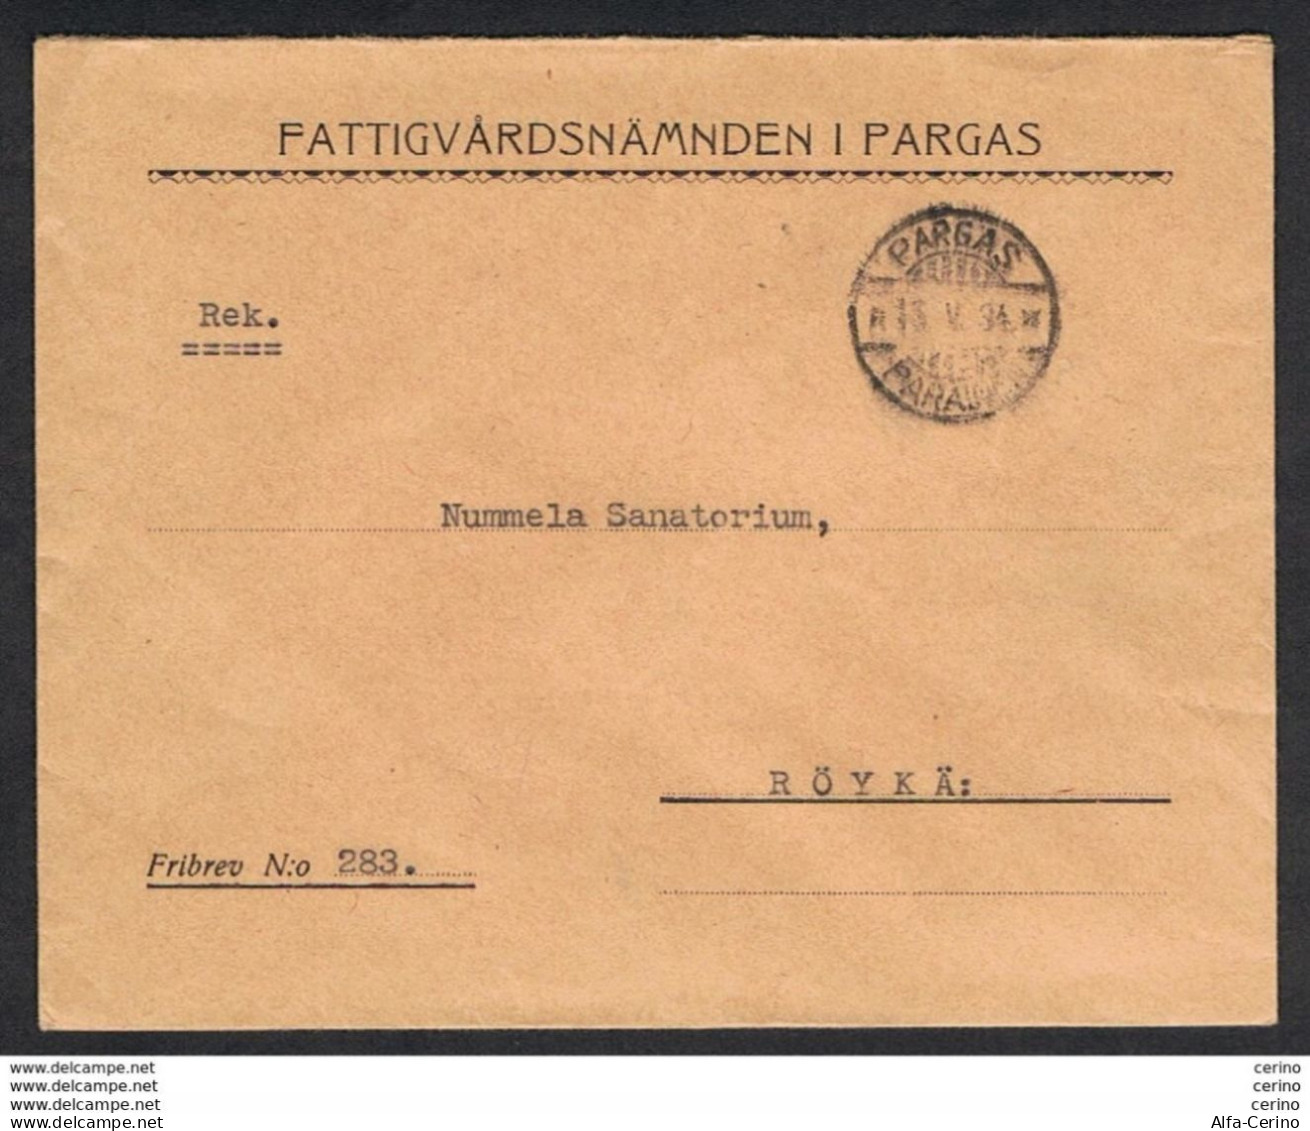 FINLAND: 1934  FREE POSTMARK ON COVERT FROM PARGAS - FATTIGVARDSNAMNDEN I ... TO ROYKA - Lettres & Documents